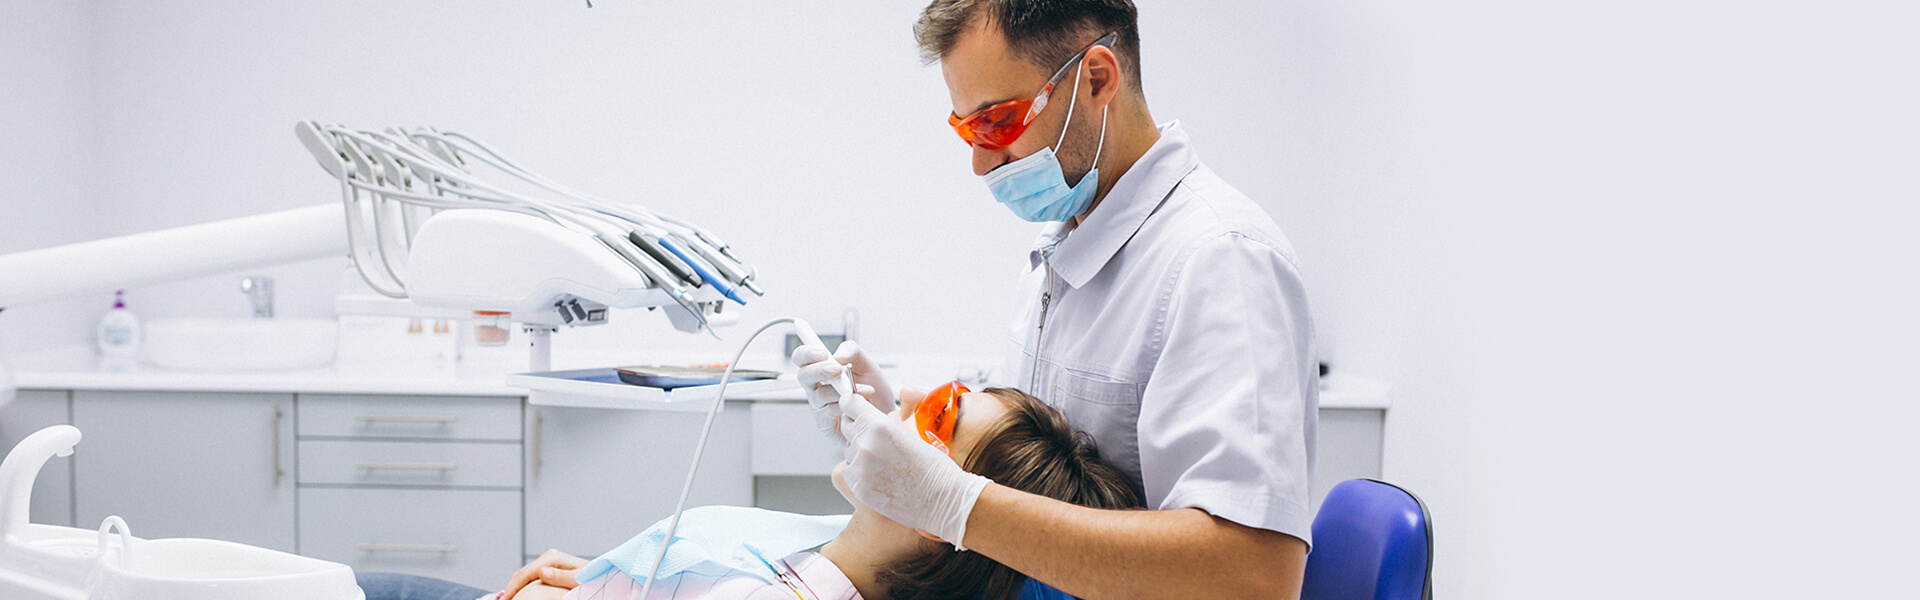 The Importance of Getting Dental Fillings